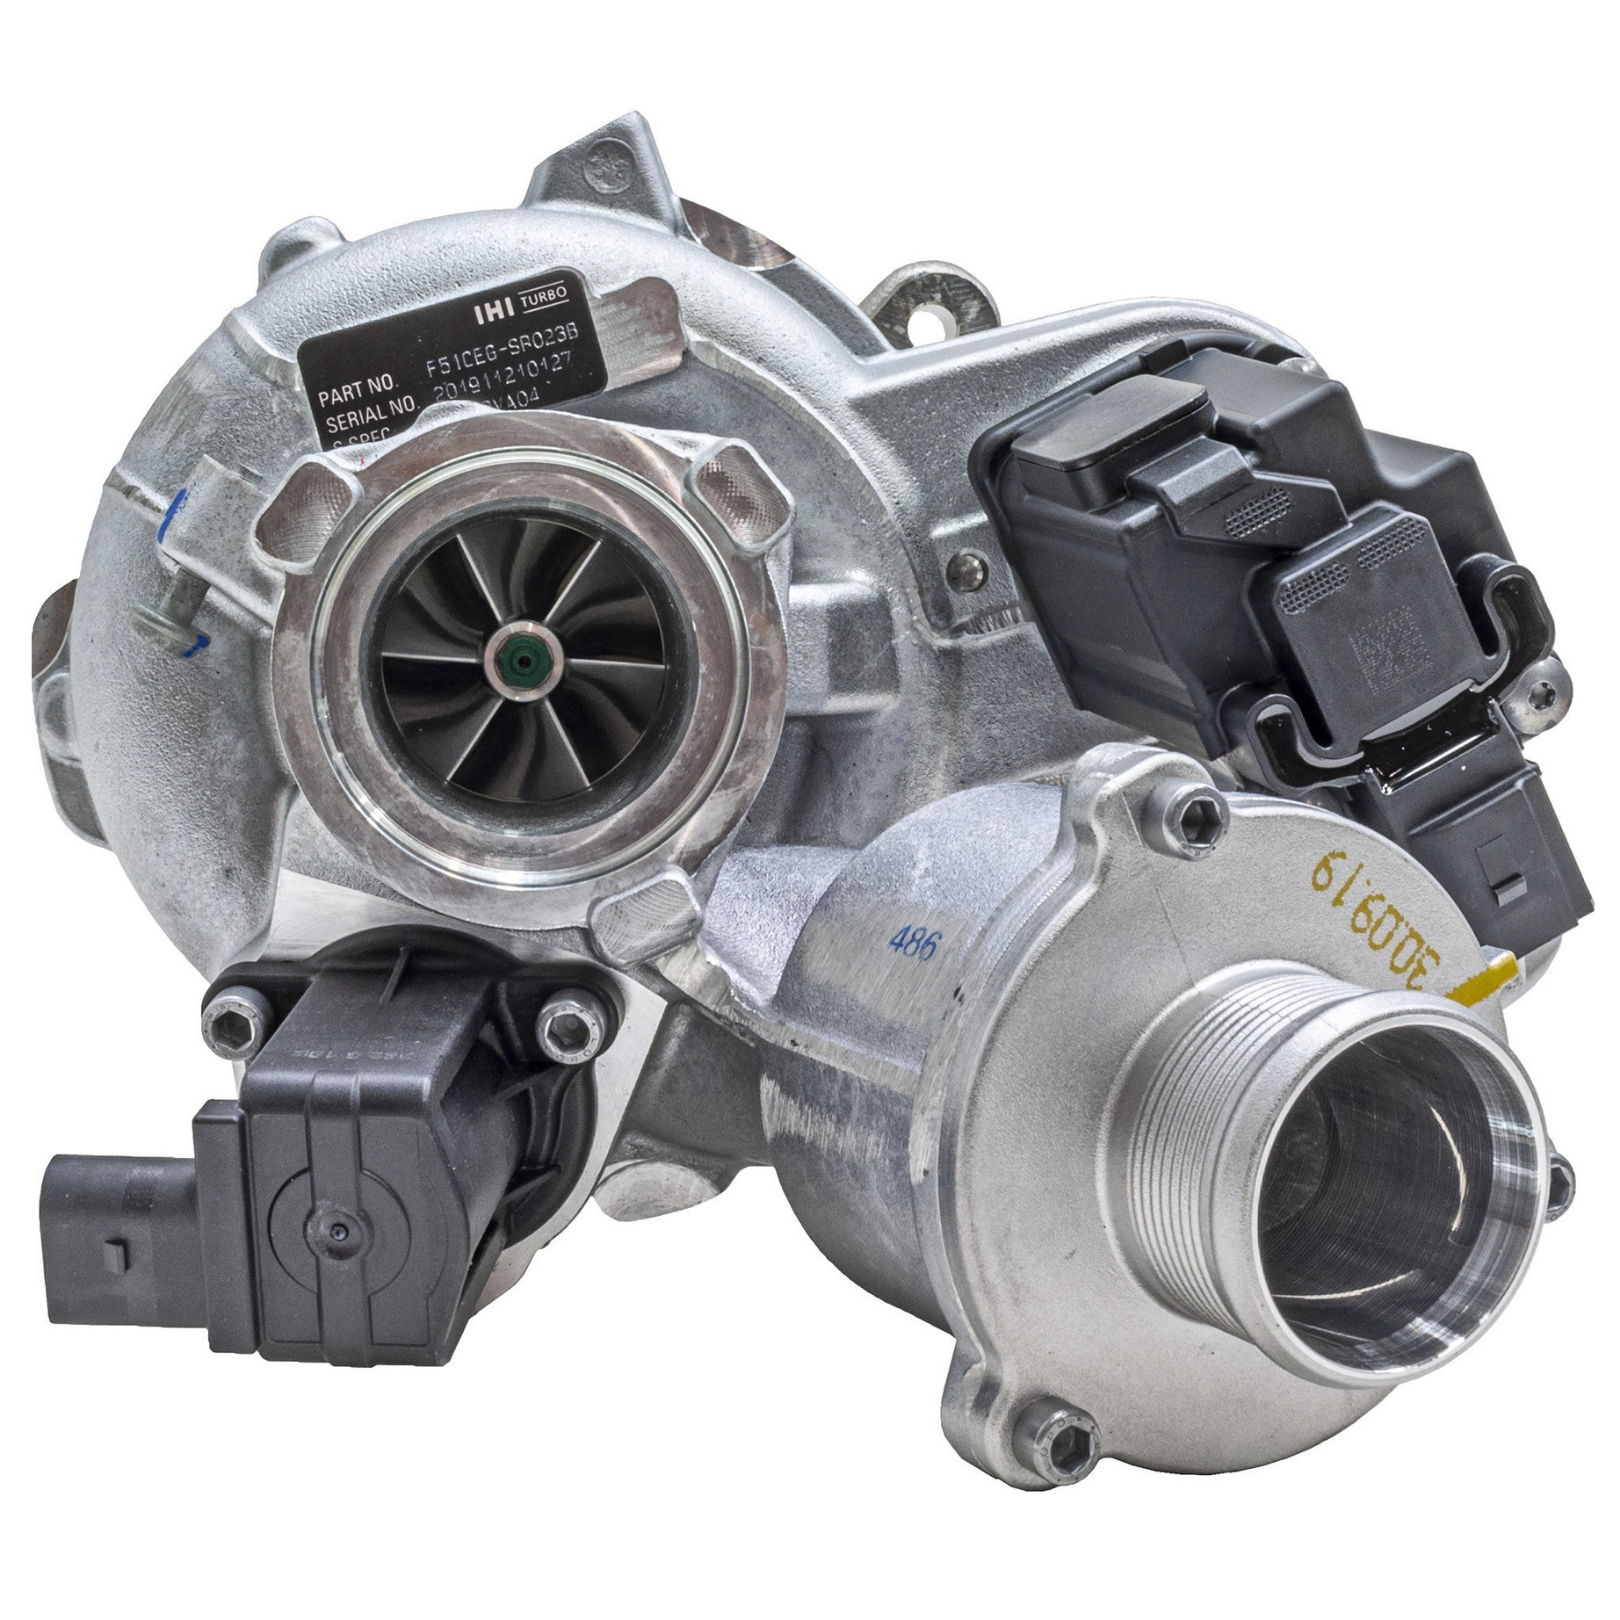 IHI IS38 Turbocharger - VW MK7 & 7.5 GOLF GTI UPGRADE, VW MK7 & 7.5 GOLF R, ED40 & TCR REPLACEMENT